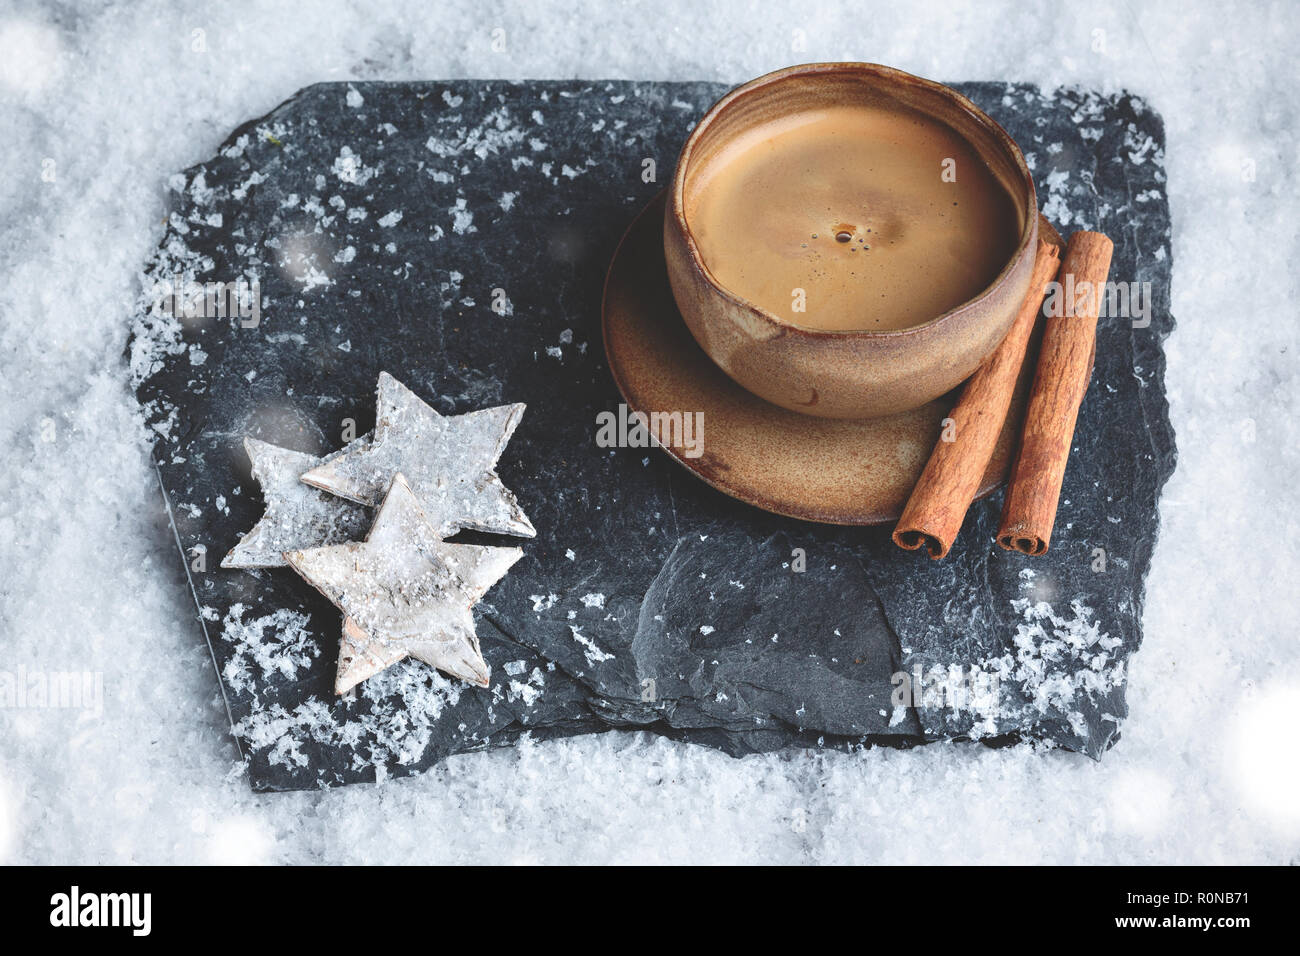 Stylish espresso cup with winter decoration on snow Stock Photo